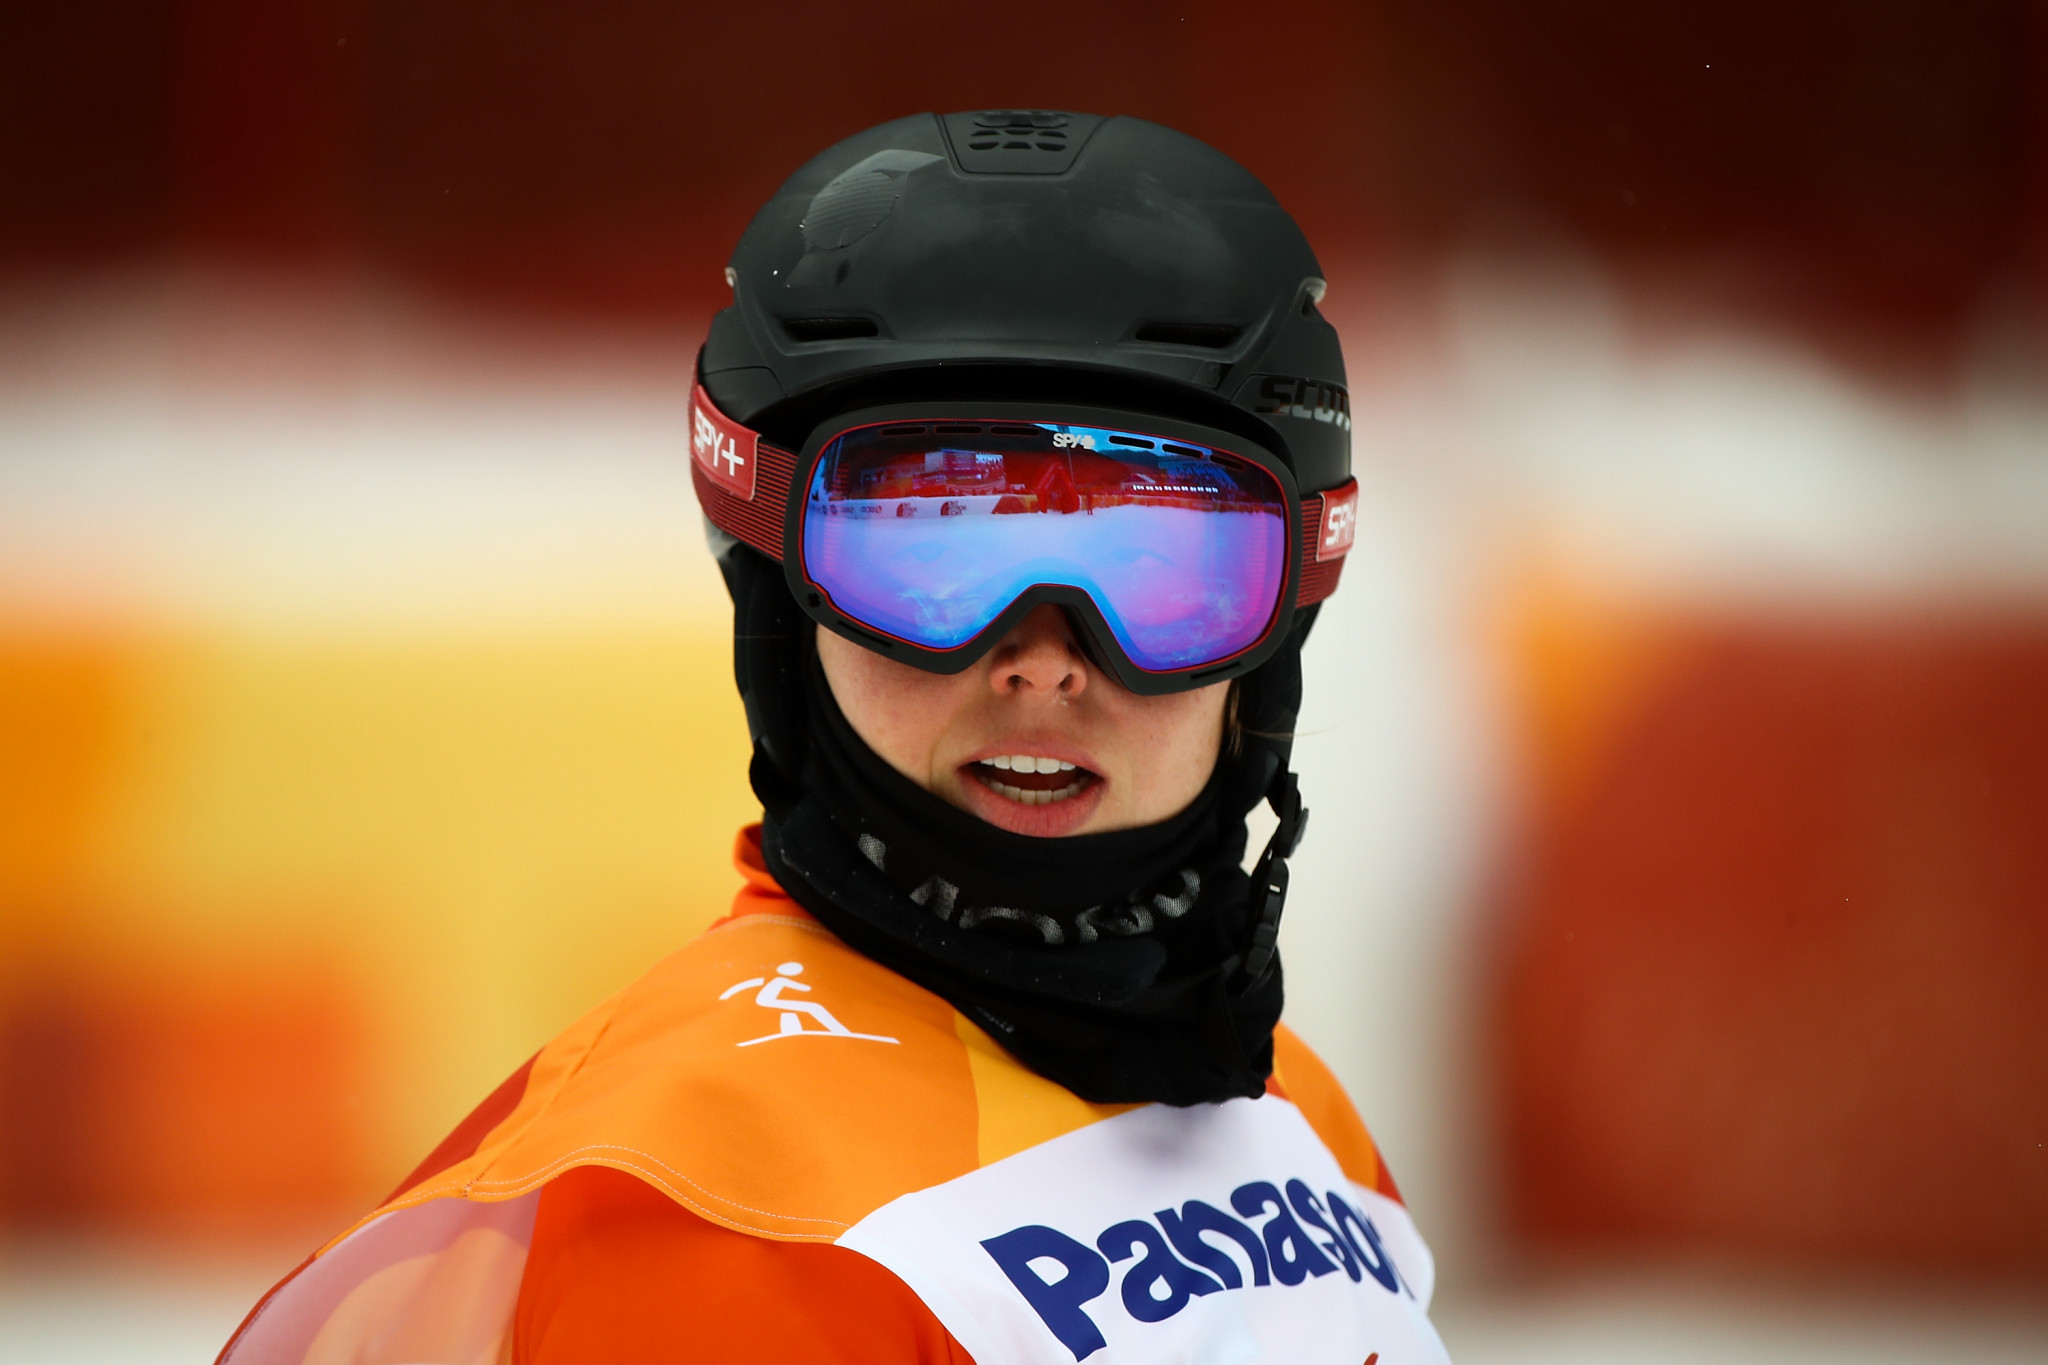 Dutch duo doubles their gold medal haul at home World Para Snowboard World Cup